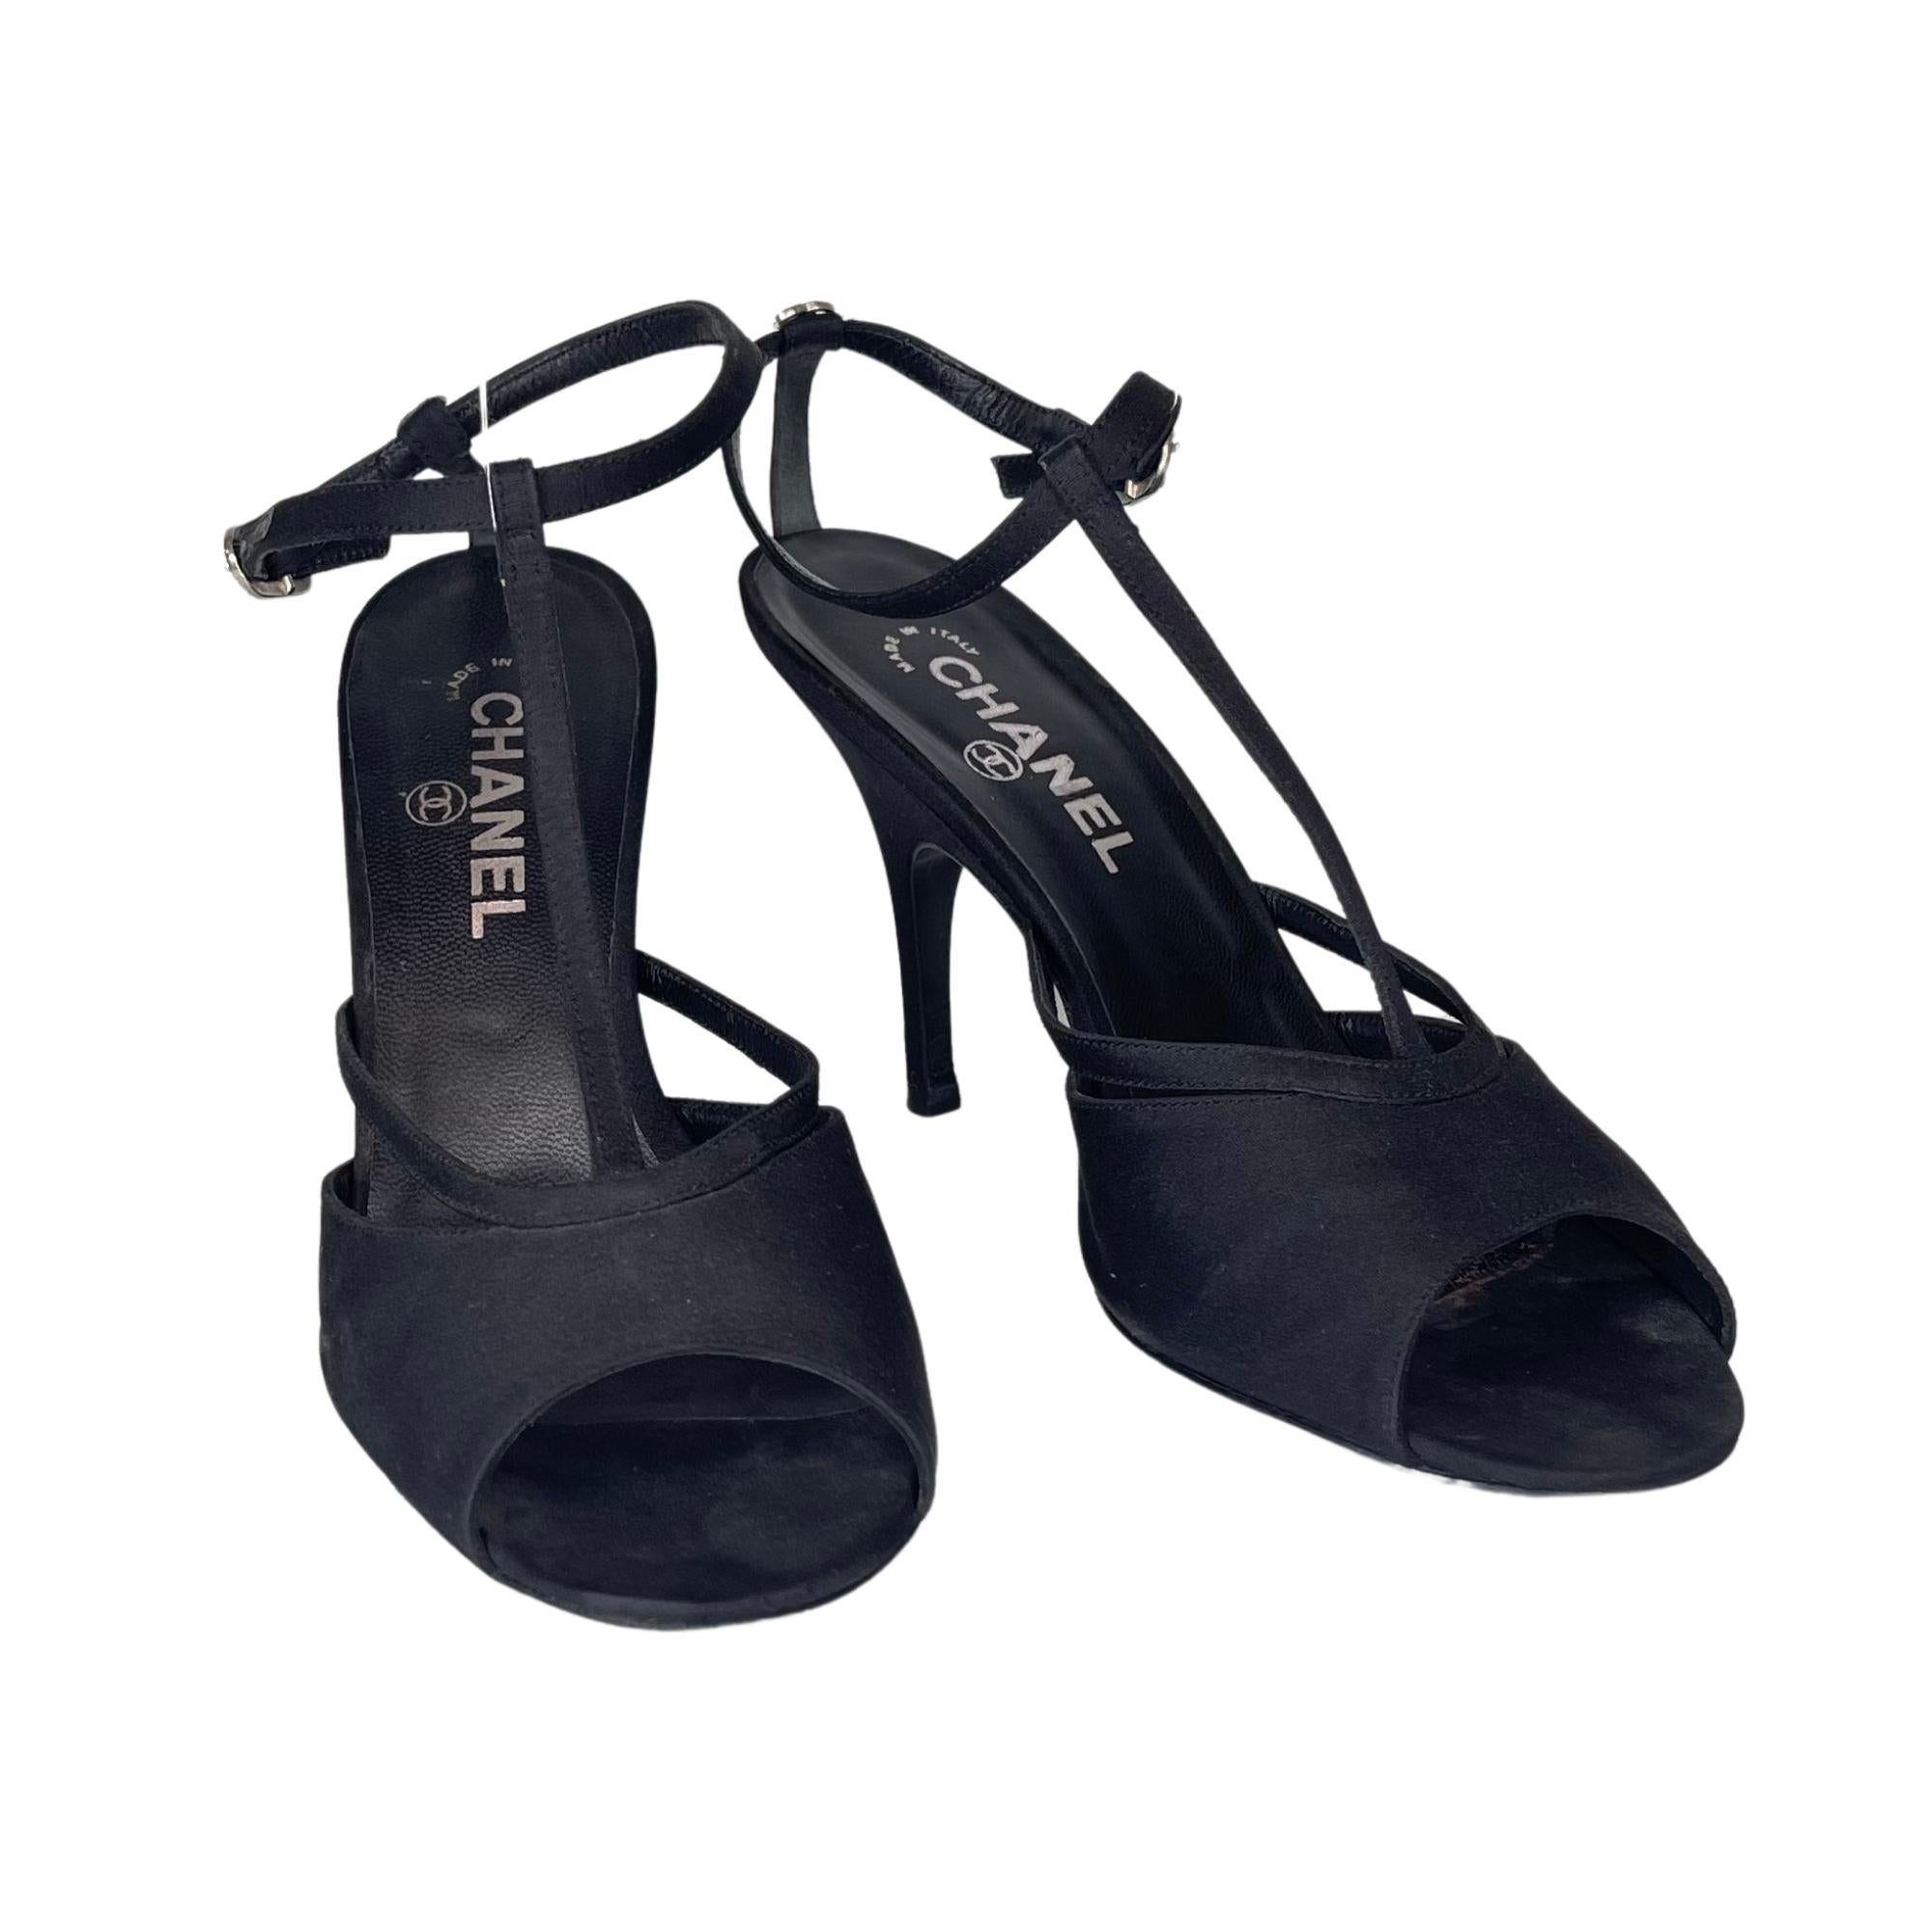 COLOR: Black
MATERIAL: Suede
SIZE: 38.5 EU / 7.5 US
COMES WITH: Box, extra jewls
CONDITION: Excellent - shoes look pristine. Minimal signs of wear with scrapes and scuffs on the bottoms.

Made in Italy